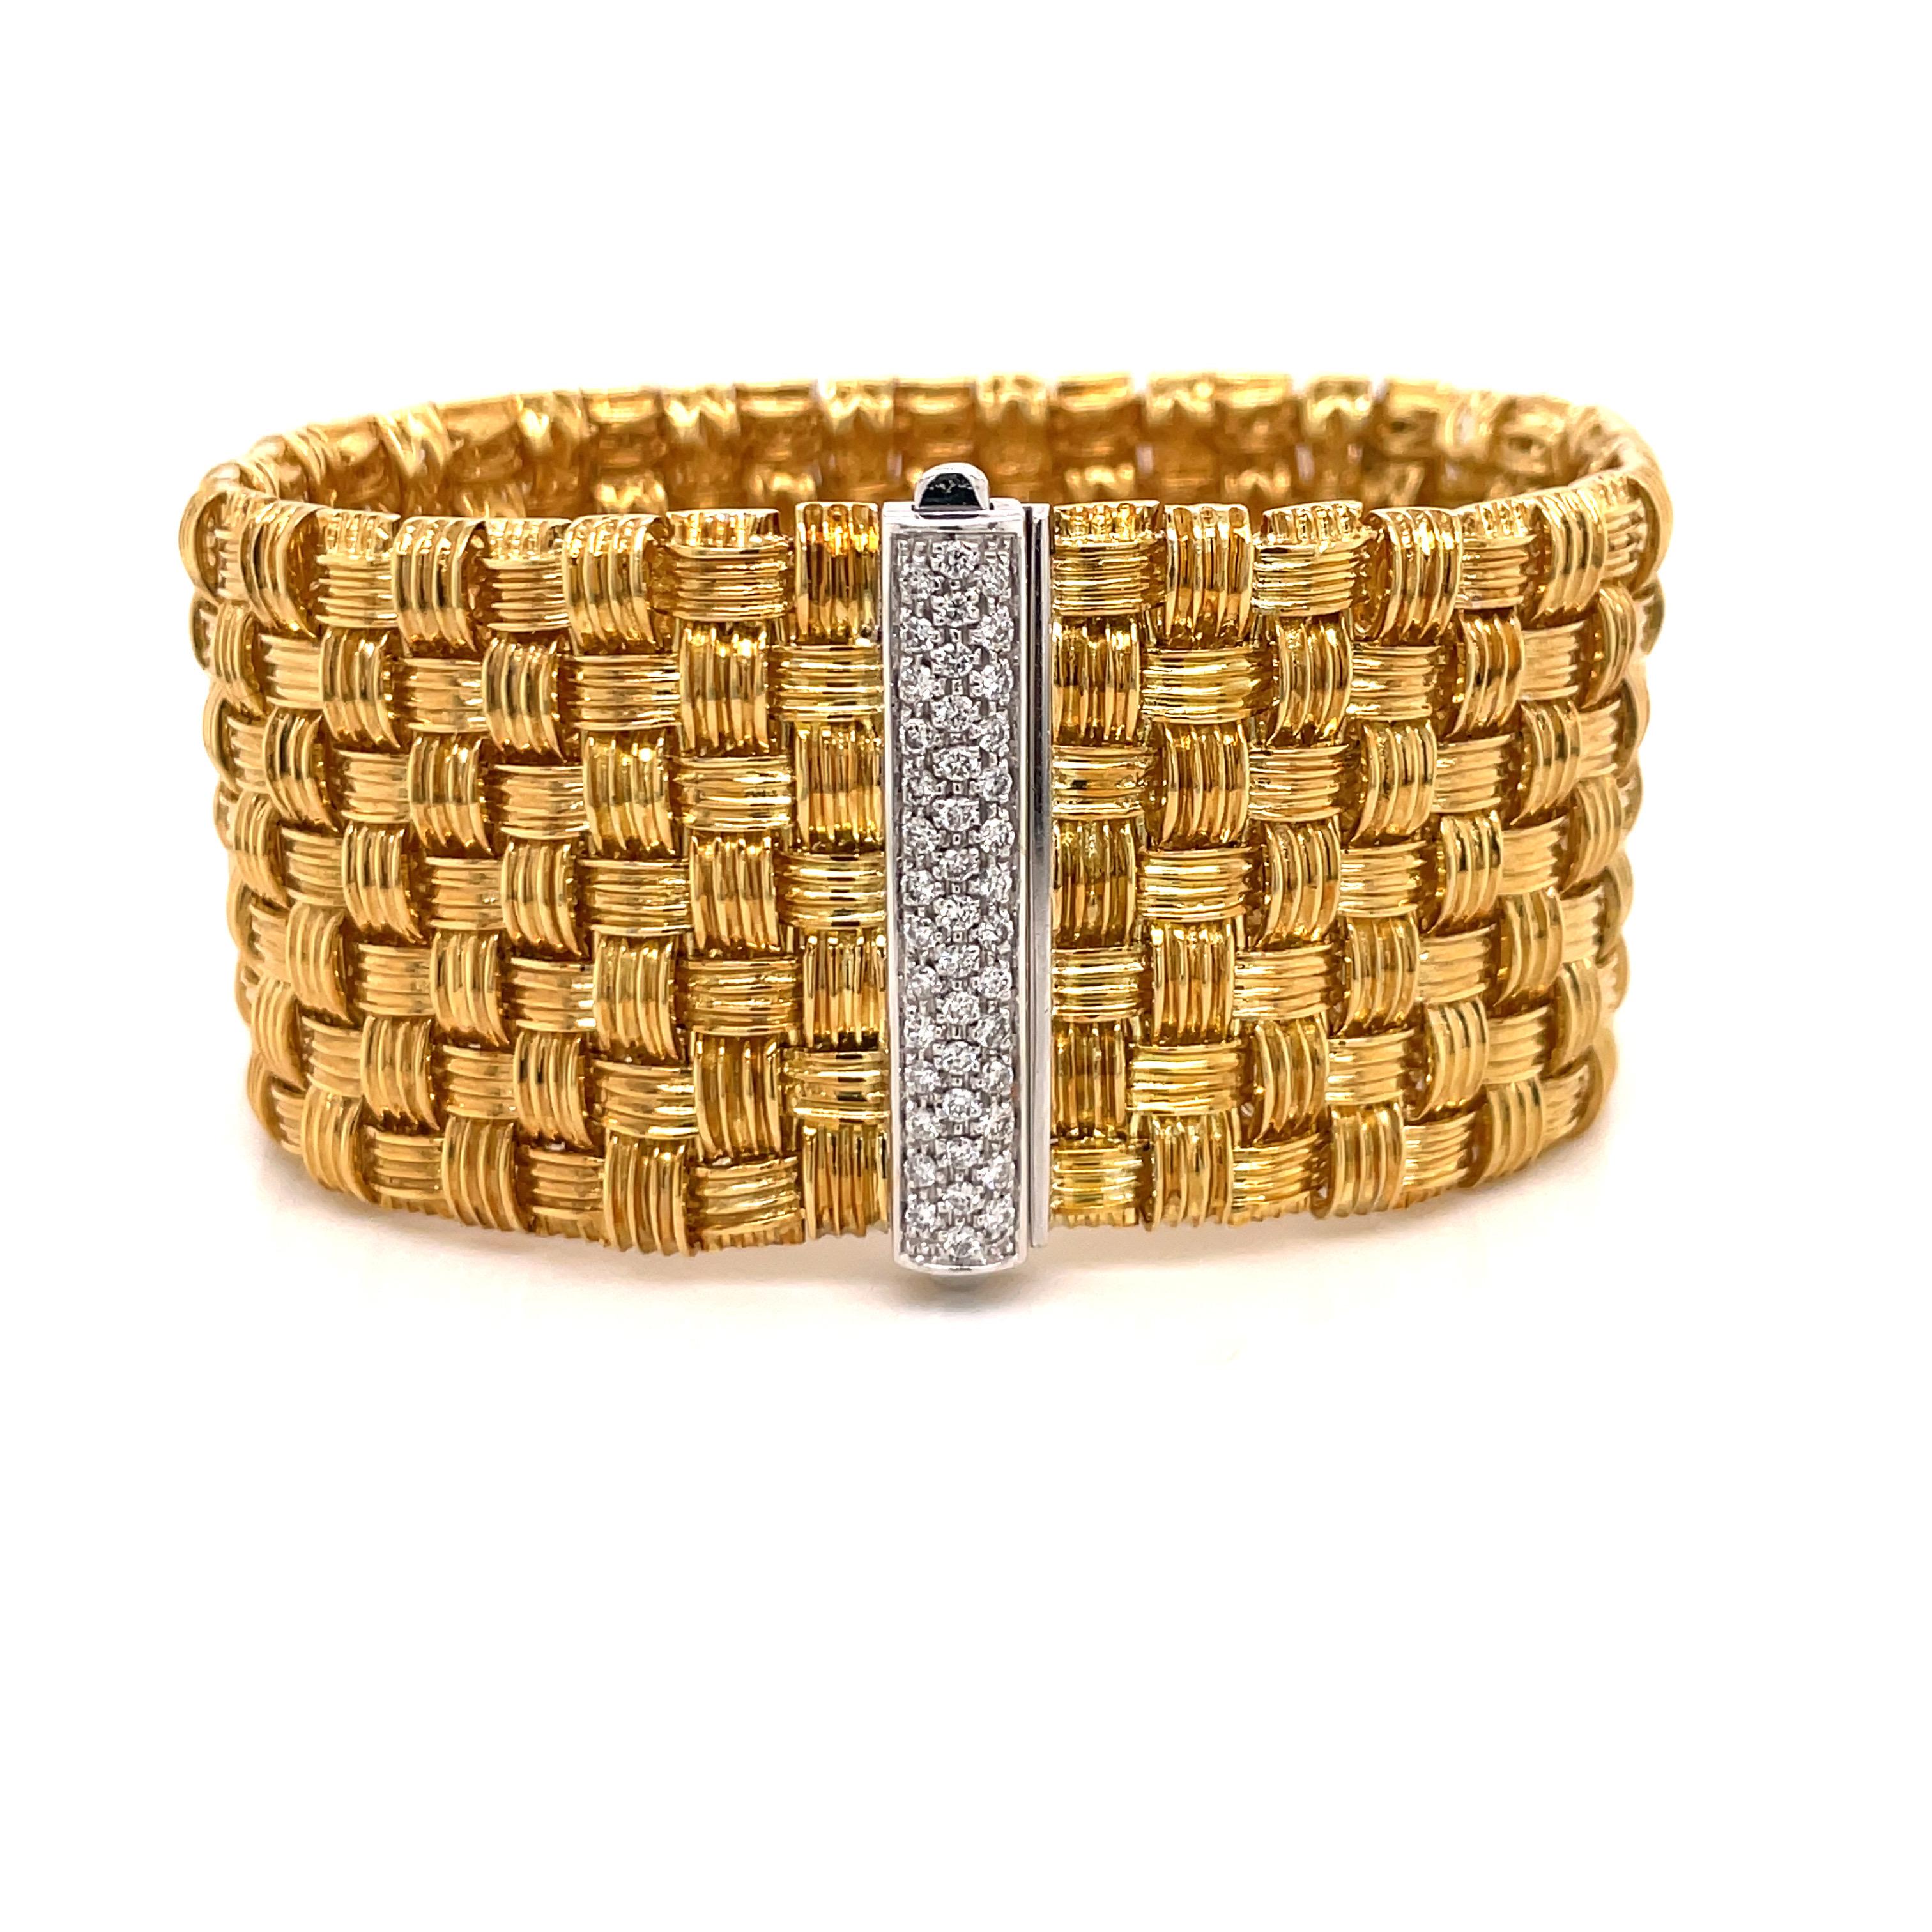 From the Appassionata Collection, this Roberto Coin bracelet features 7 rows of 18 Karat Yellow gold woven motif weighing 126.8 Grams and a diamond clasp.
Retail: $30,580.00